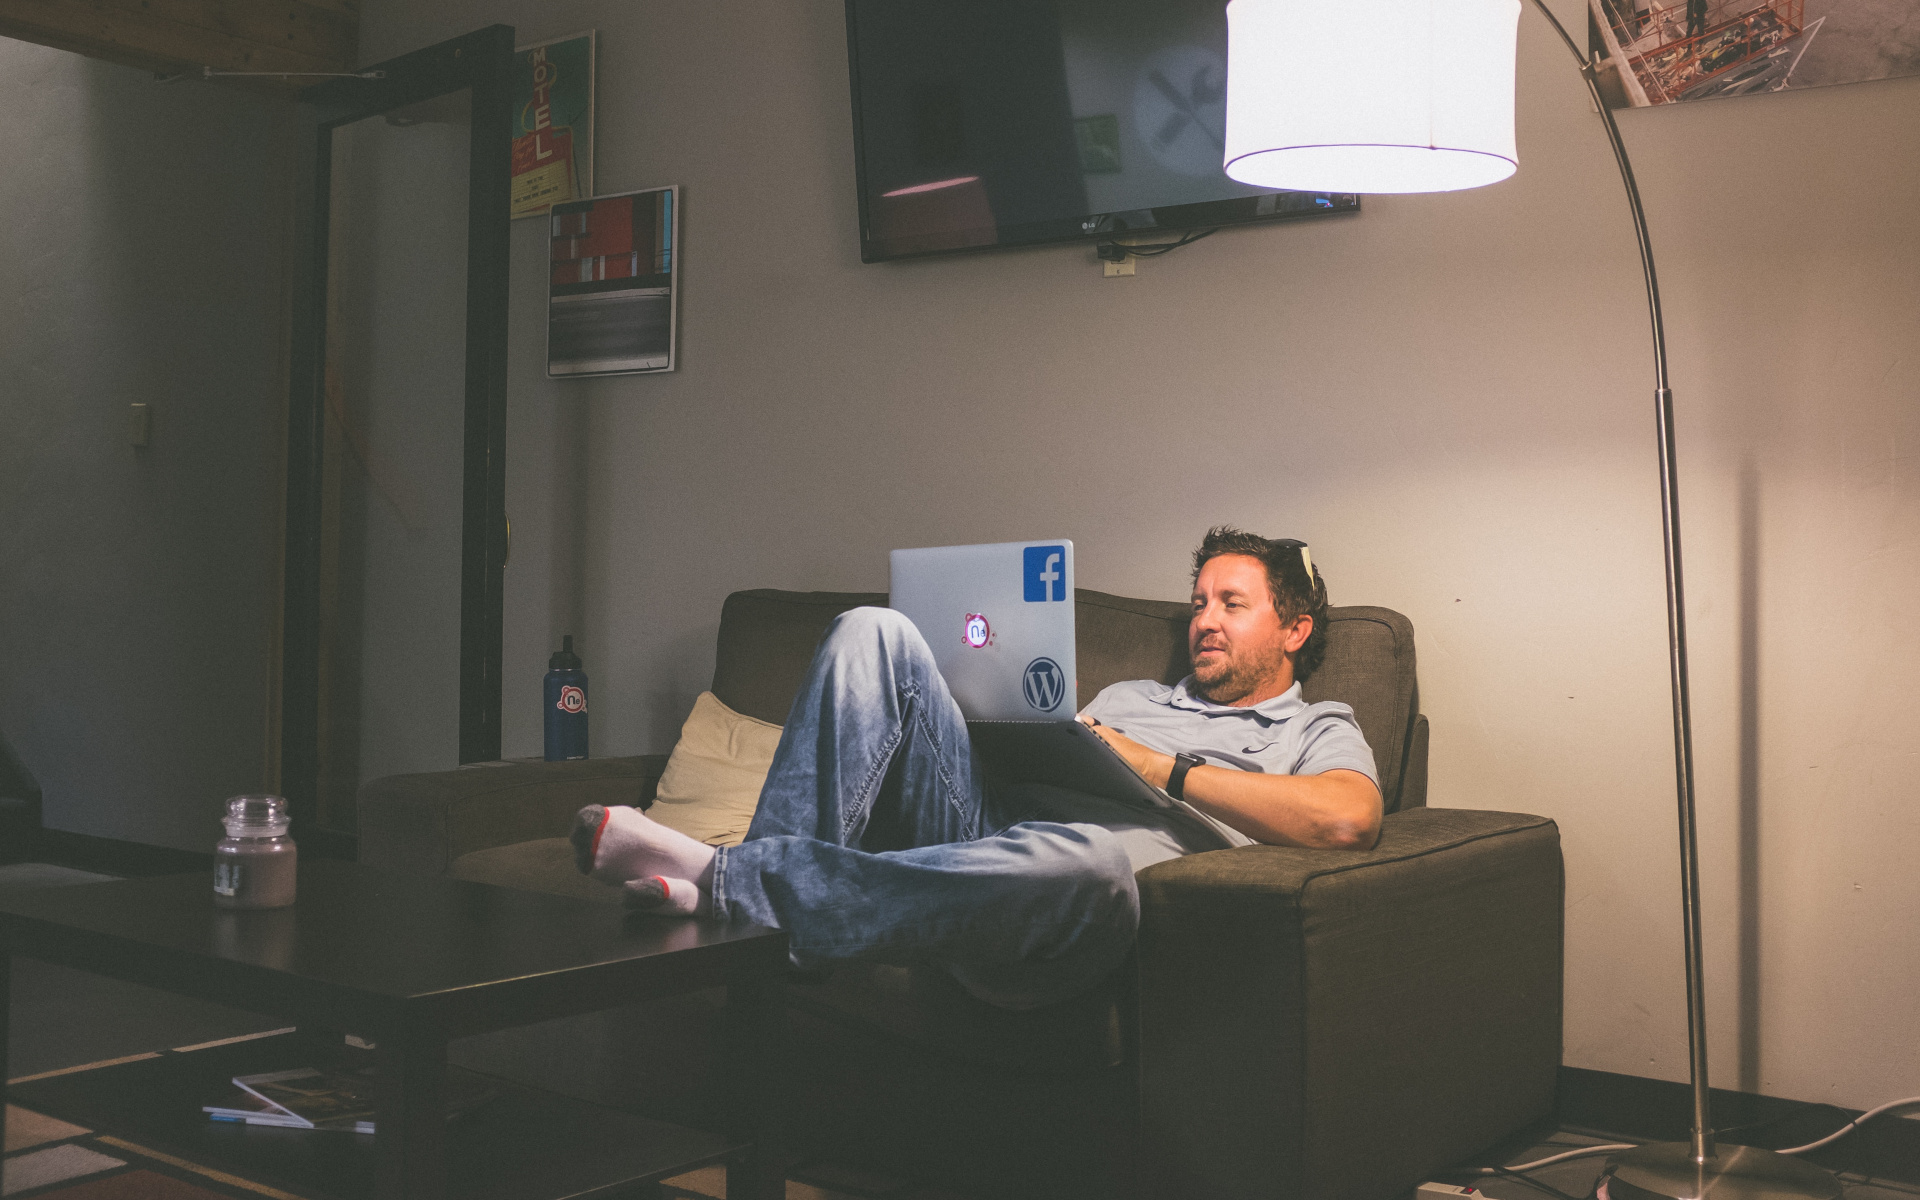 Man Sitting On Couch Looking At A Laptop